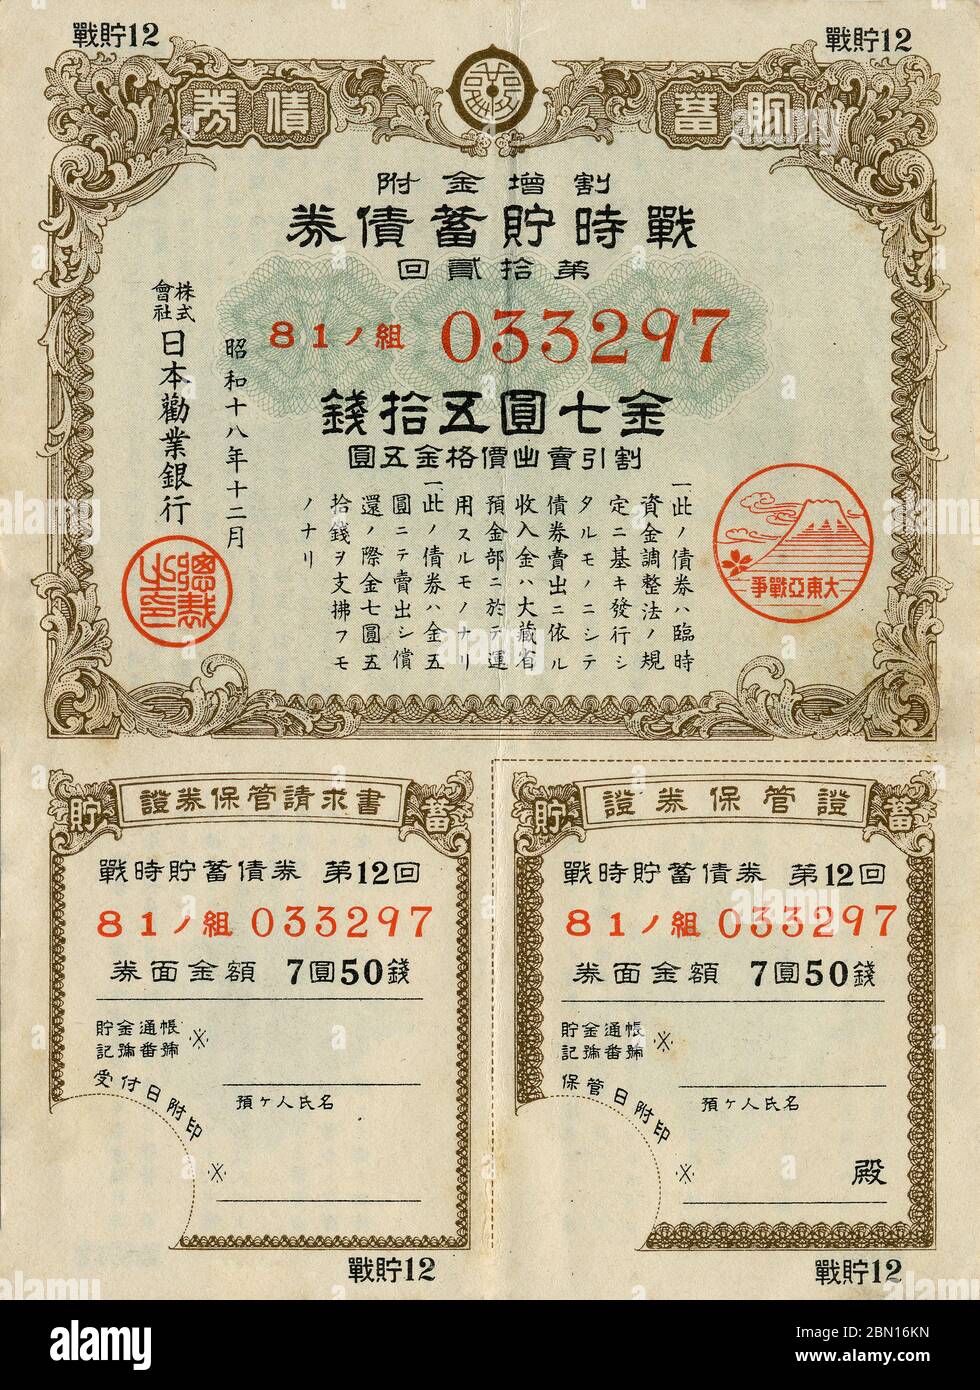 [ 1943 Japan - Japanese Pacific War Bond ] —   Pacific War Bond of 7.5 yen issued in Japan in 1943 (Showa 18), featuring a Japanese WWII navy ship, tank and warplane.  In the 1930s and 1940s, 'voluntary' savings were so greatly encouraged to finance the Japanese war effort that by 1944 (Showa 19) Japanese households were saving an incredible 39.5% of disposable income.  20th century vintage bond. Stock Photo